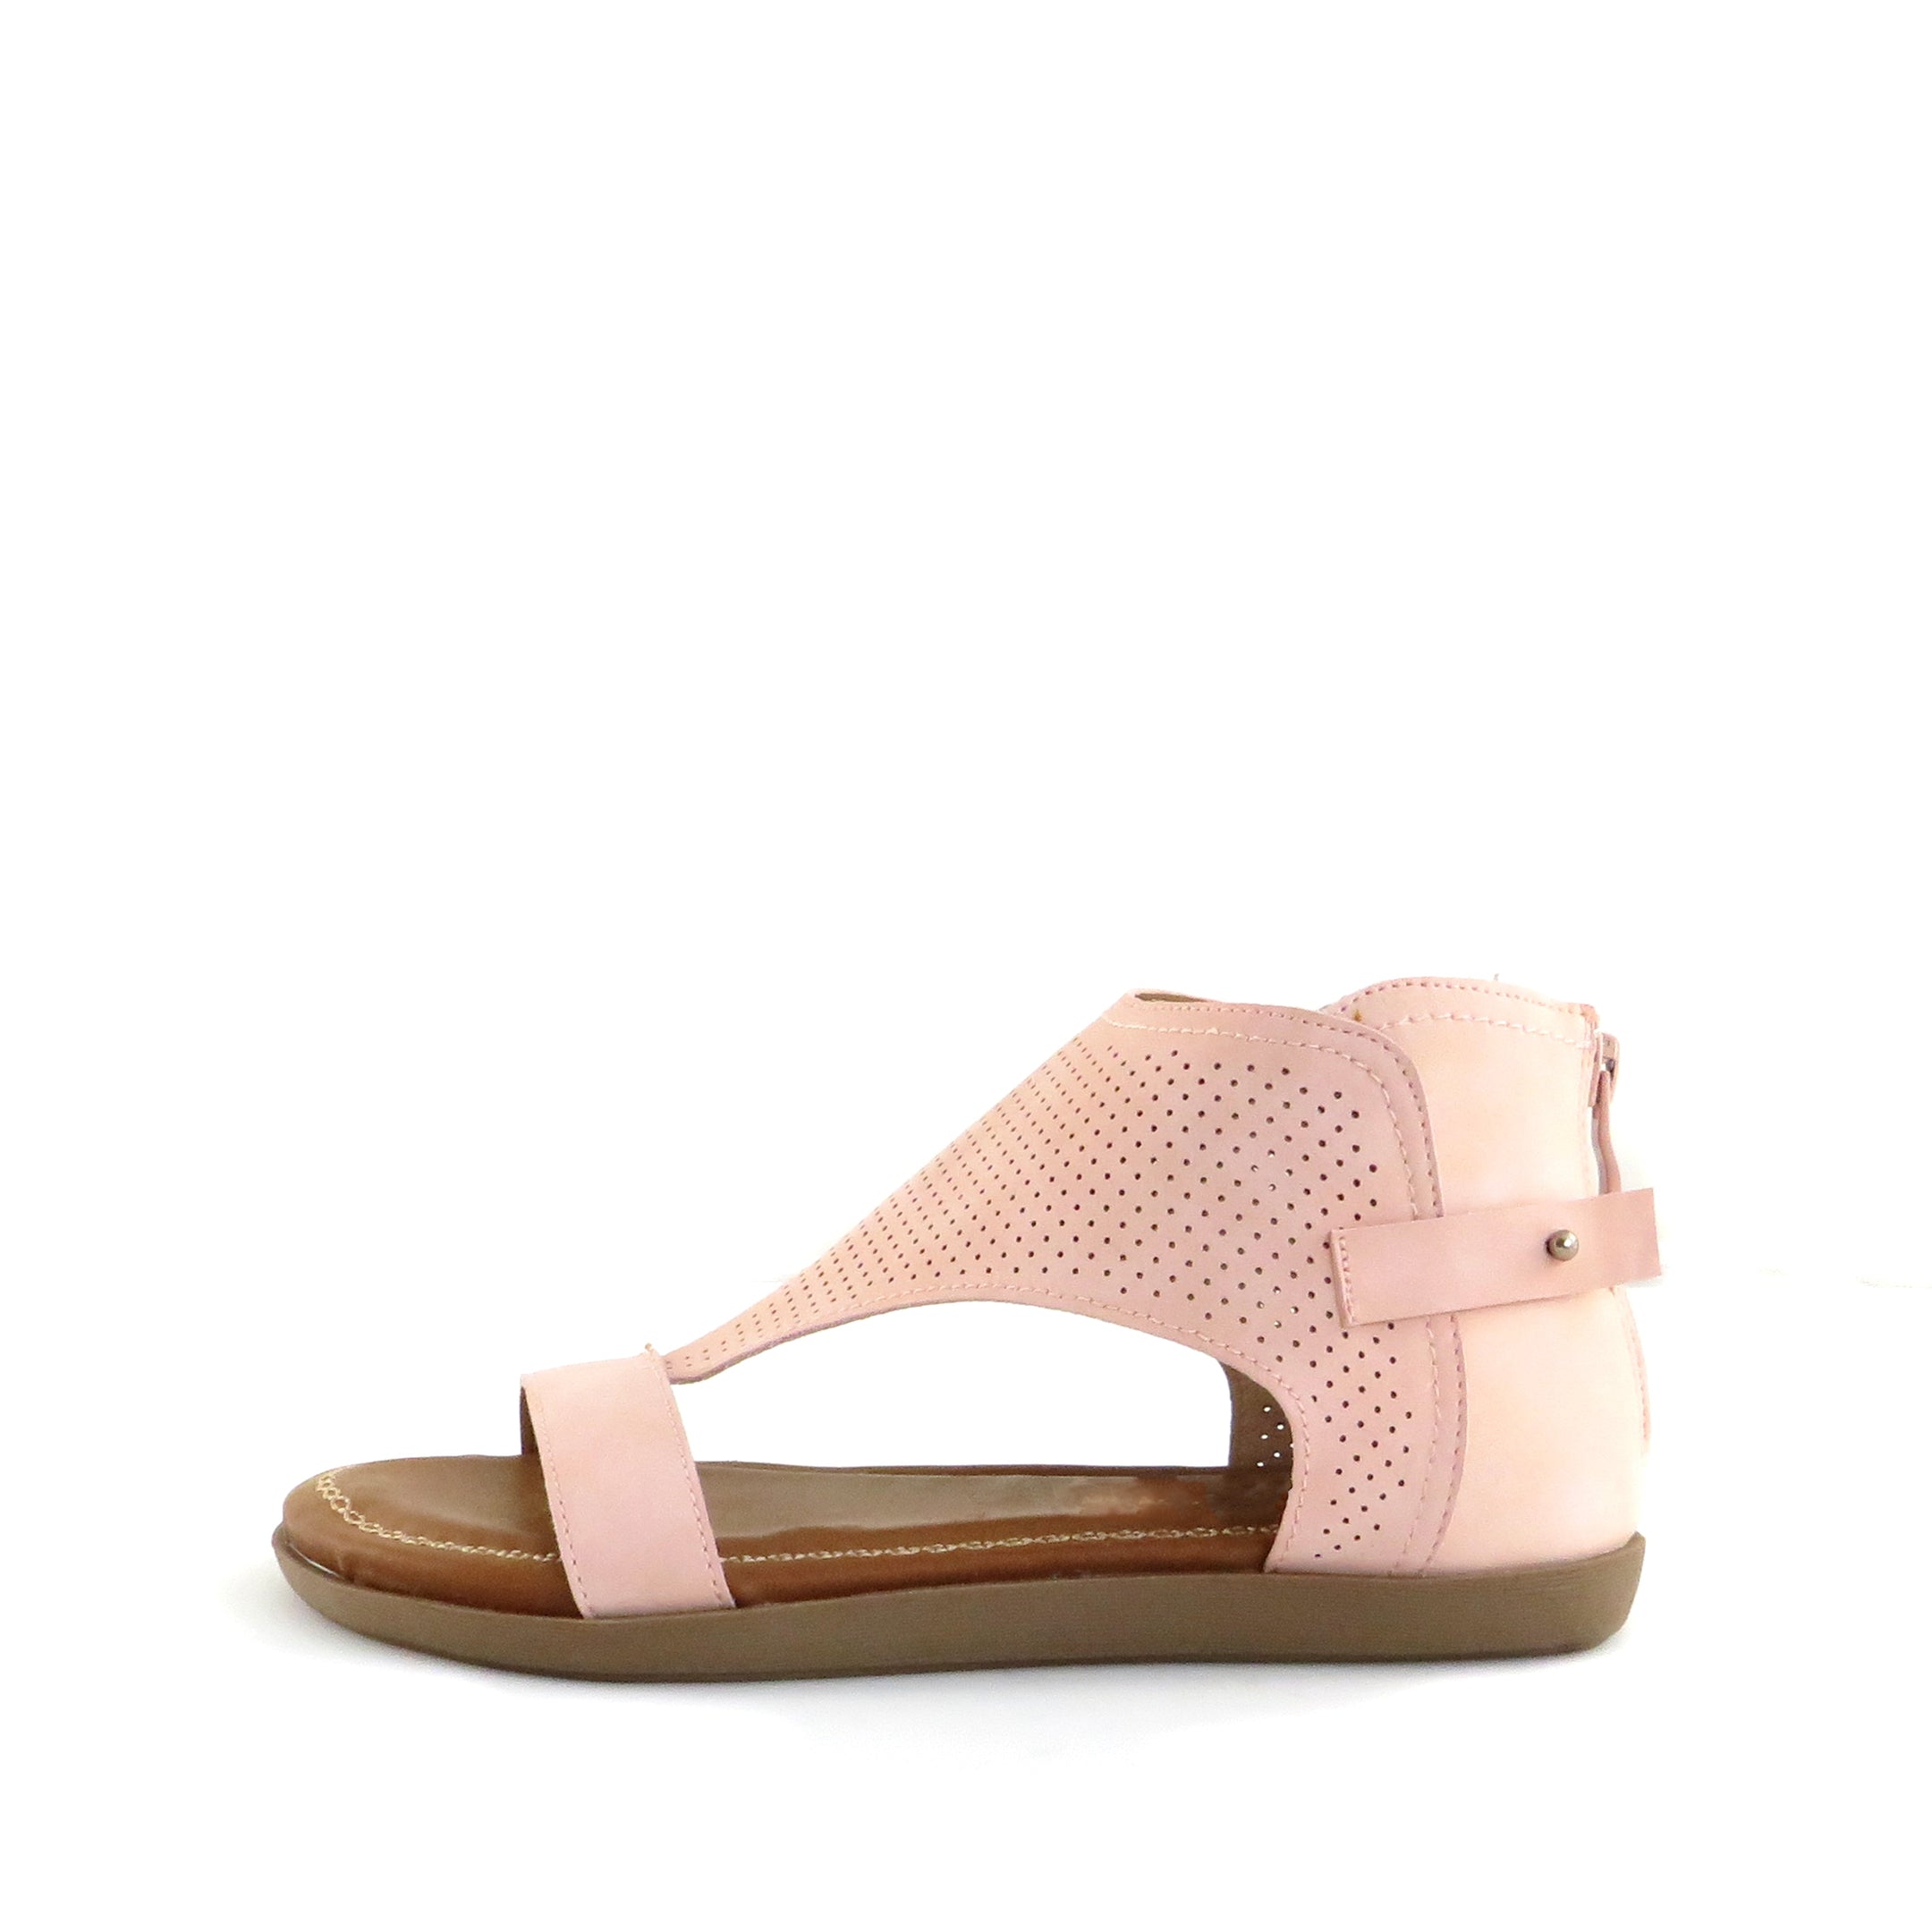 Buy Women's Coop Peach Perforated Sandal by Nest Shoes